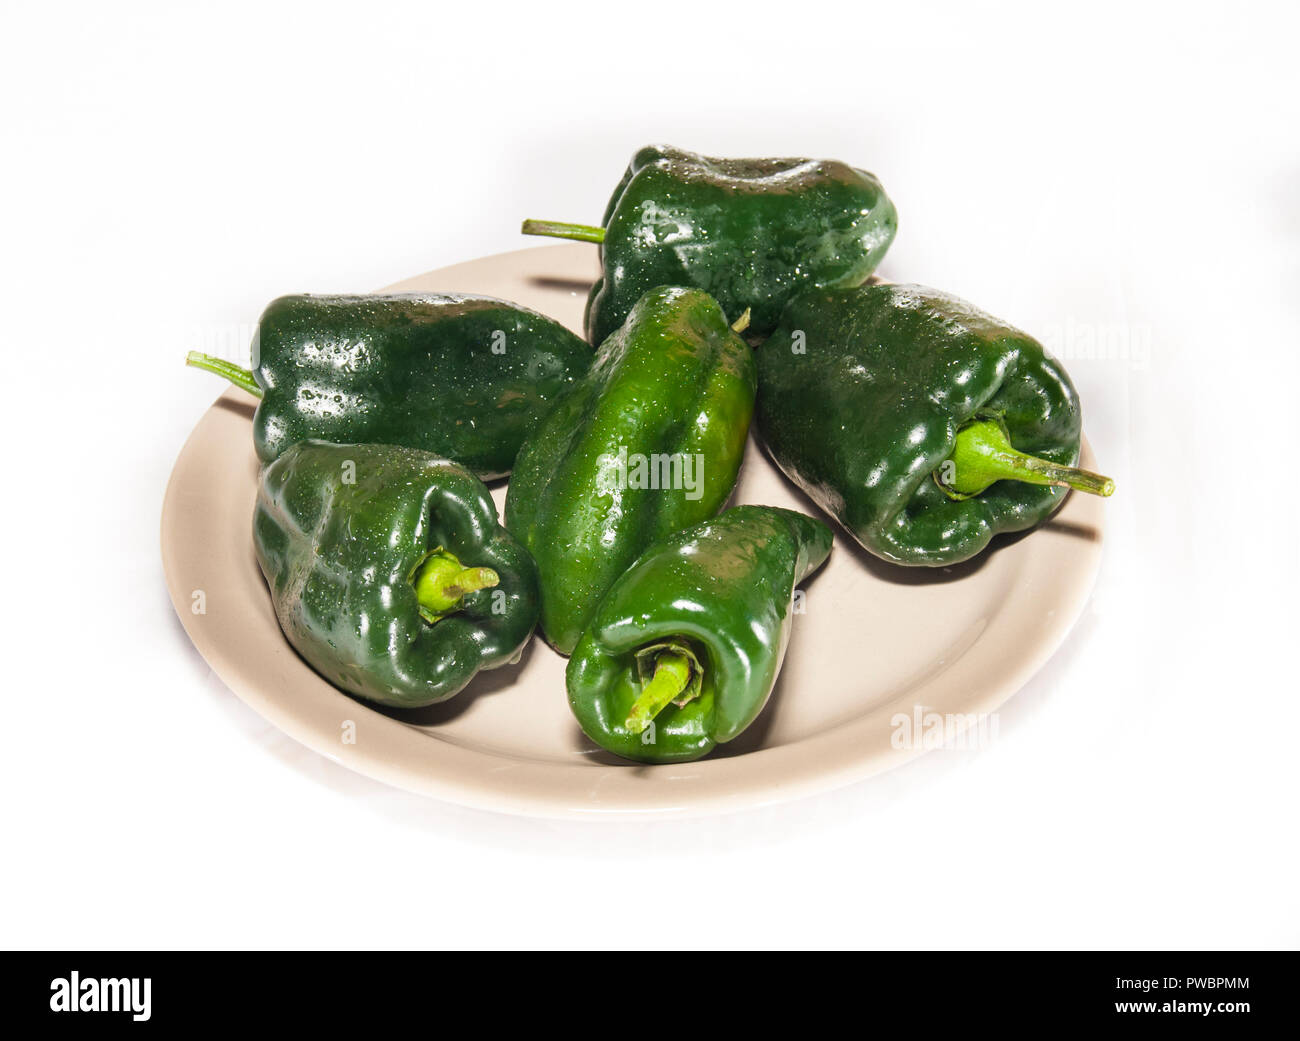 Procedure to peel CHILES PASILLA, in order to prepare chiles rellenos or rajas (a mexican food dish) Stock Photo